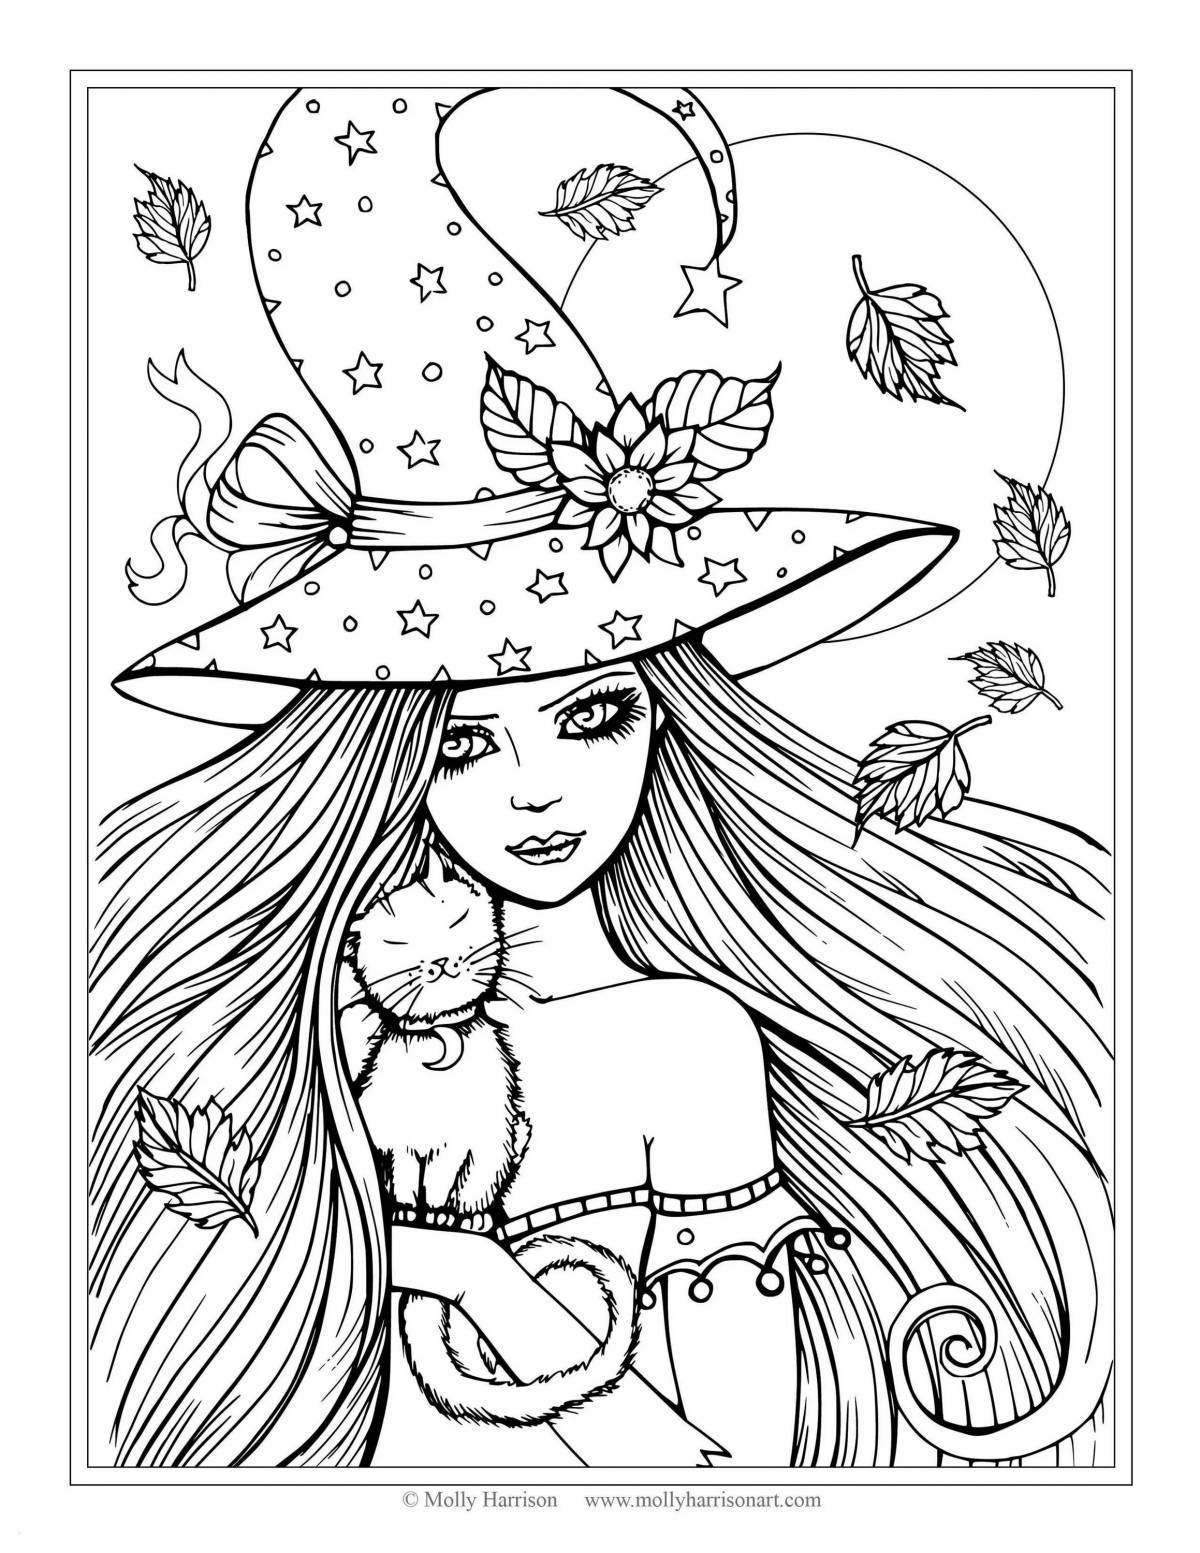 Color-brilliant coloring page 16-17 years old